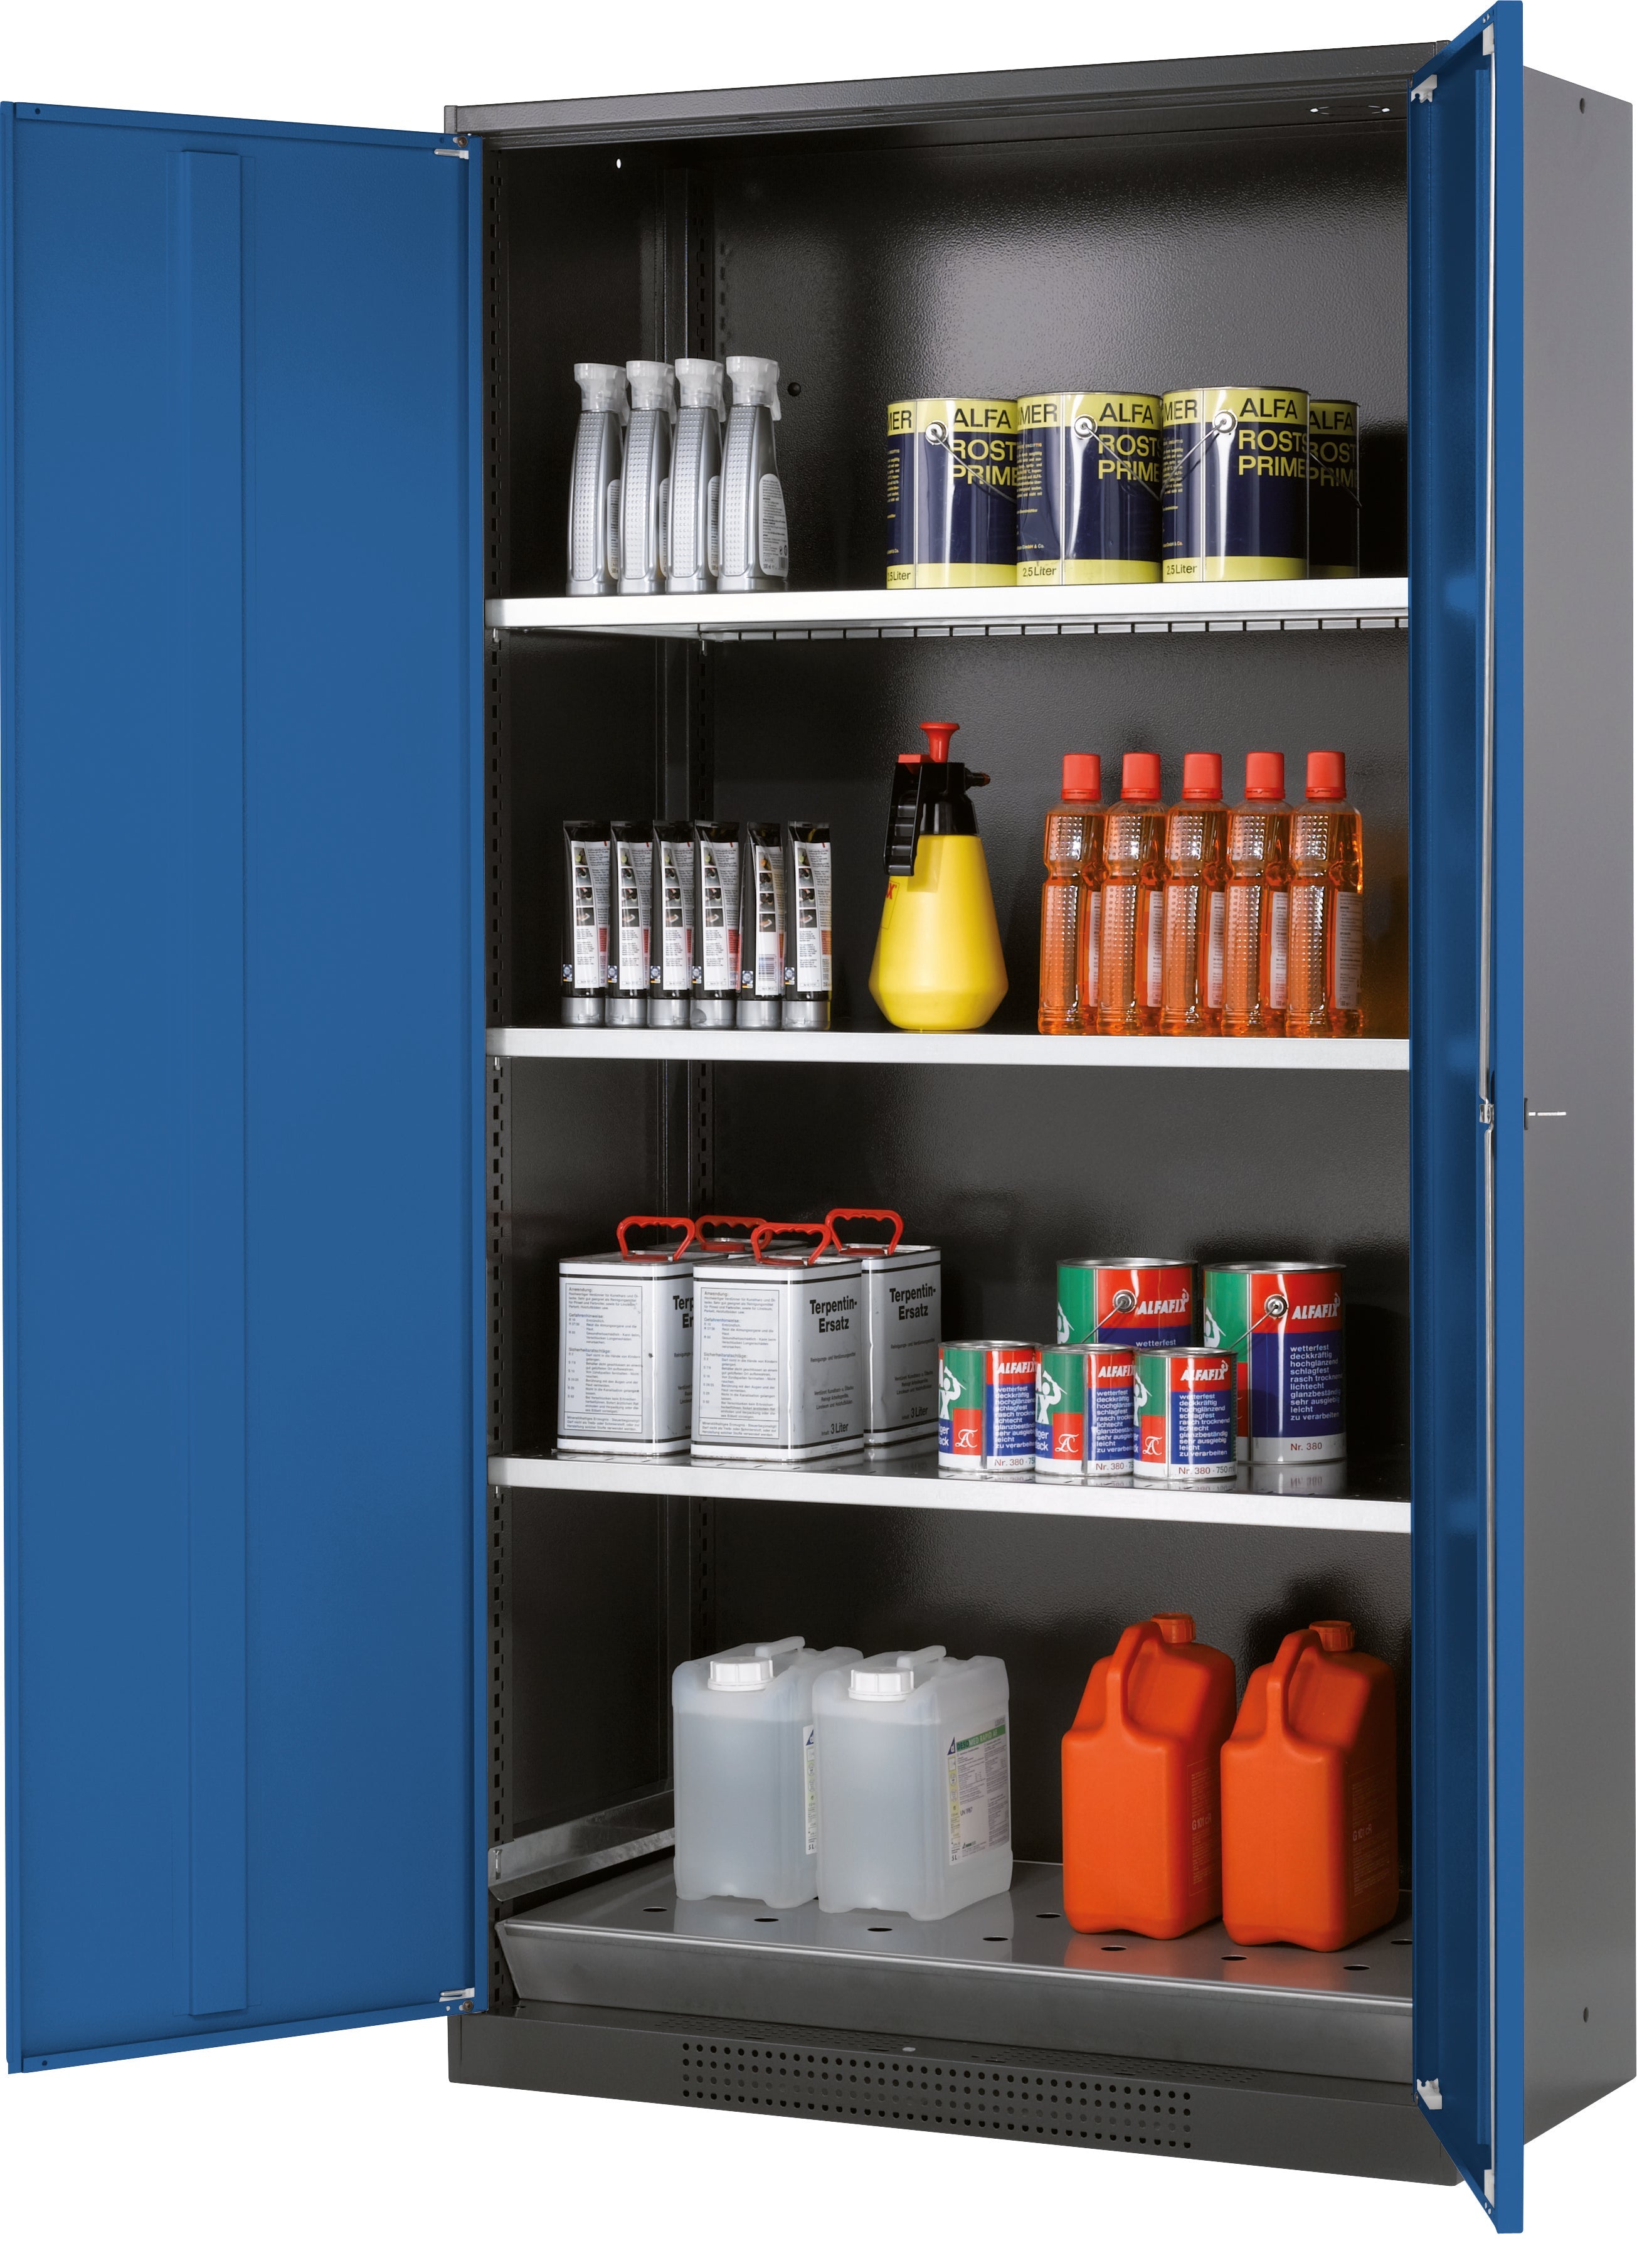 Chemical cabinet CS-CLASSIC model CS.195.105 in gentian blue RAL 5010 with 3x standard shelves (sheet steel)